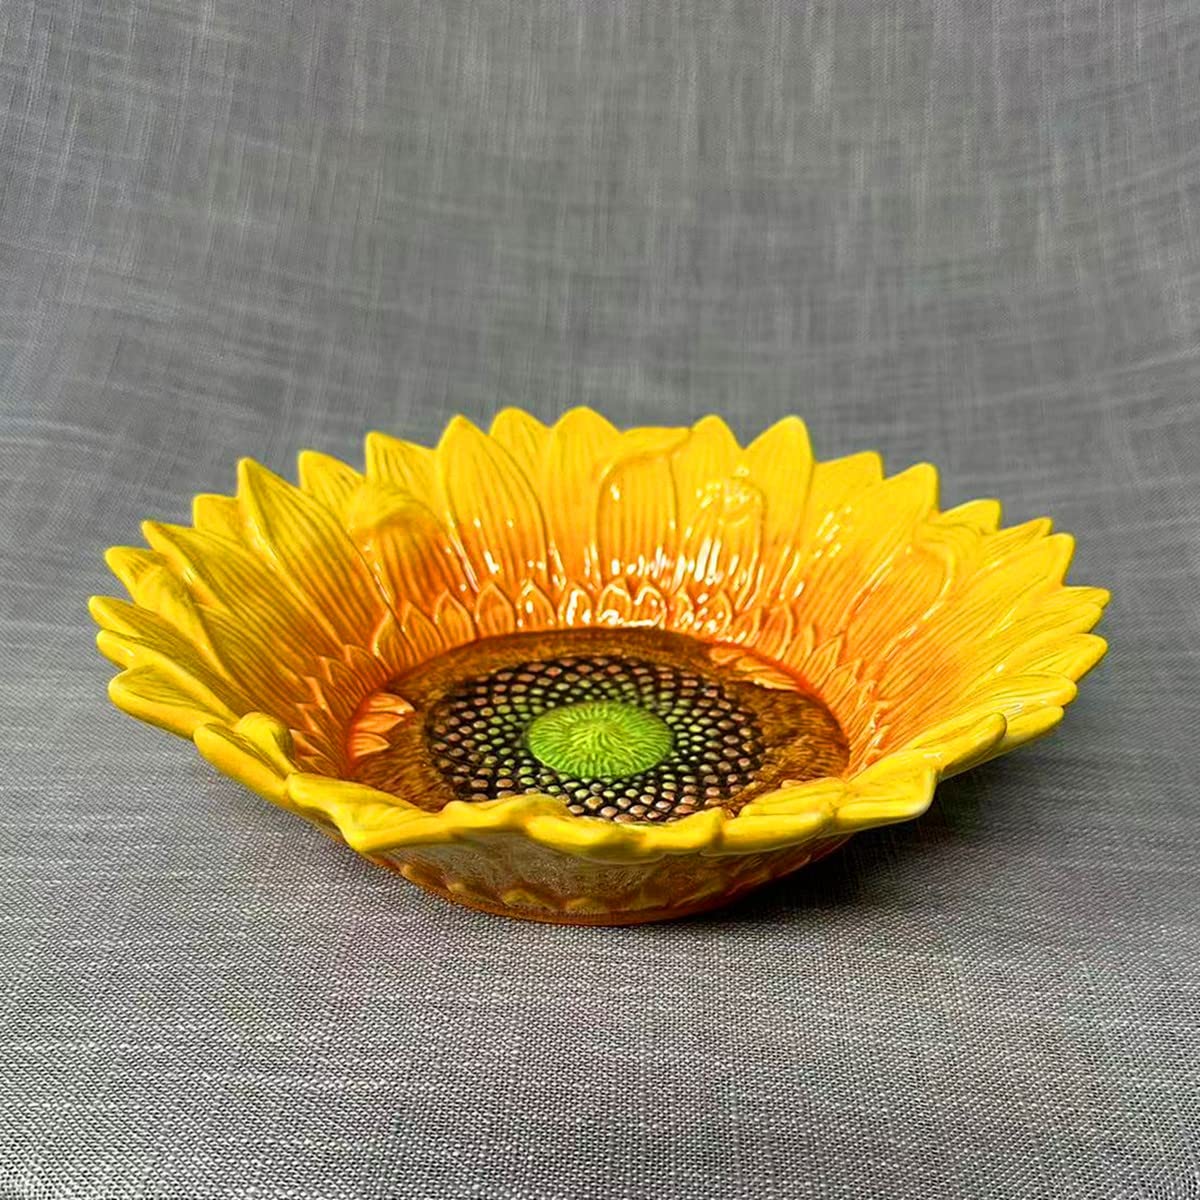 FORLONG Ceramic Medium Fruit Bowl Dessert Cake Candy Snack Plate, Hand Painted Sunflower-shaped Decorative Bowl, Art Tabletop Home Décor -10.8inches